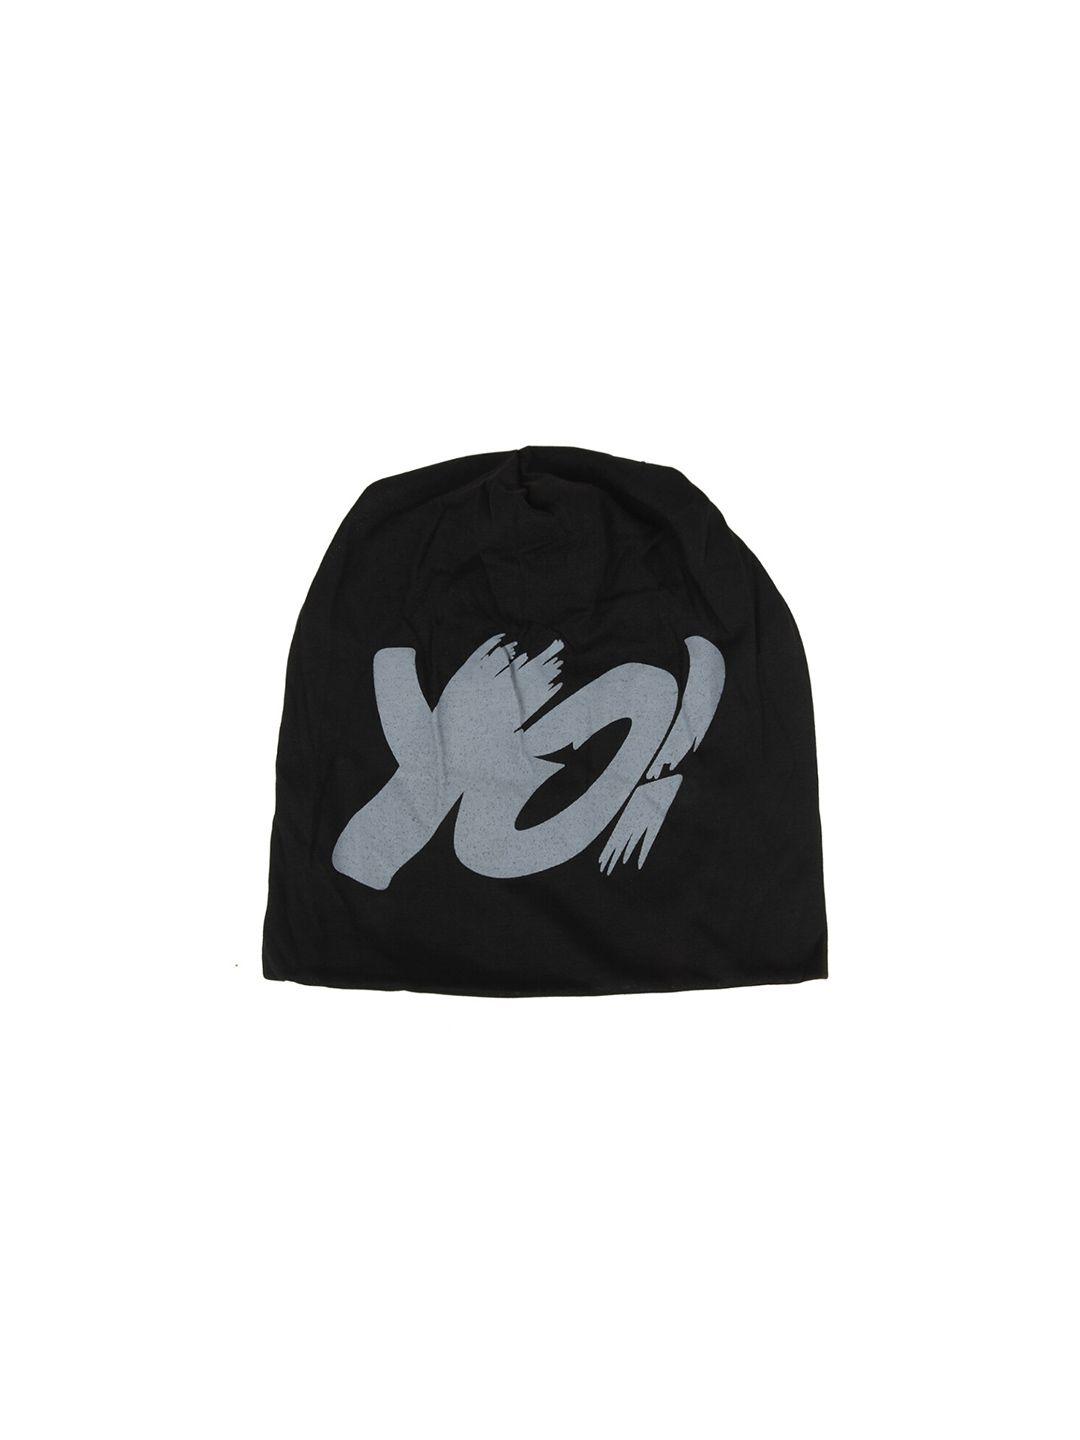 isweven printed beanie cap